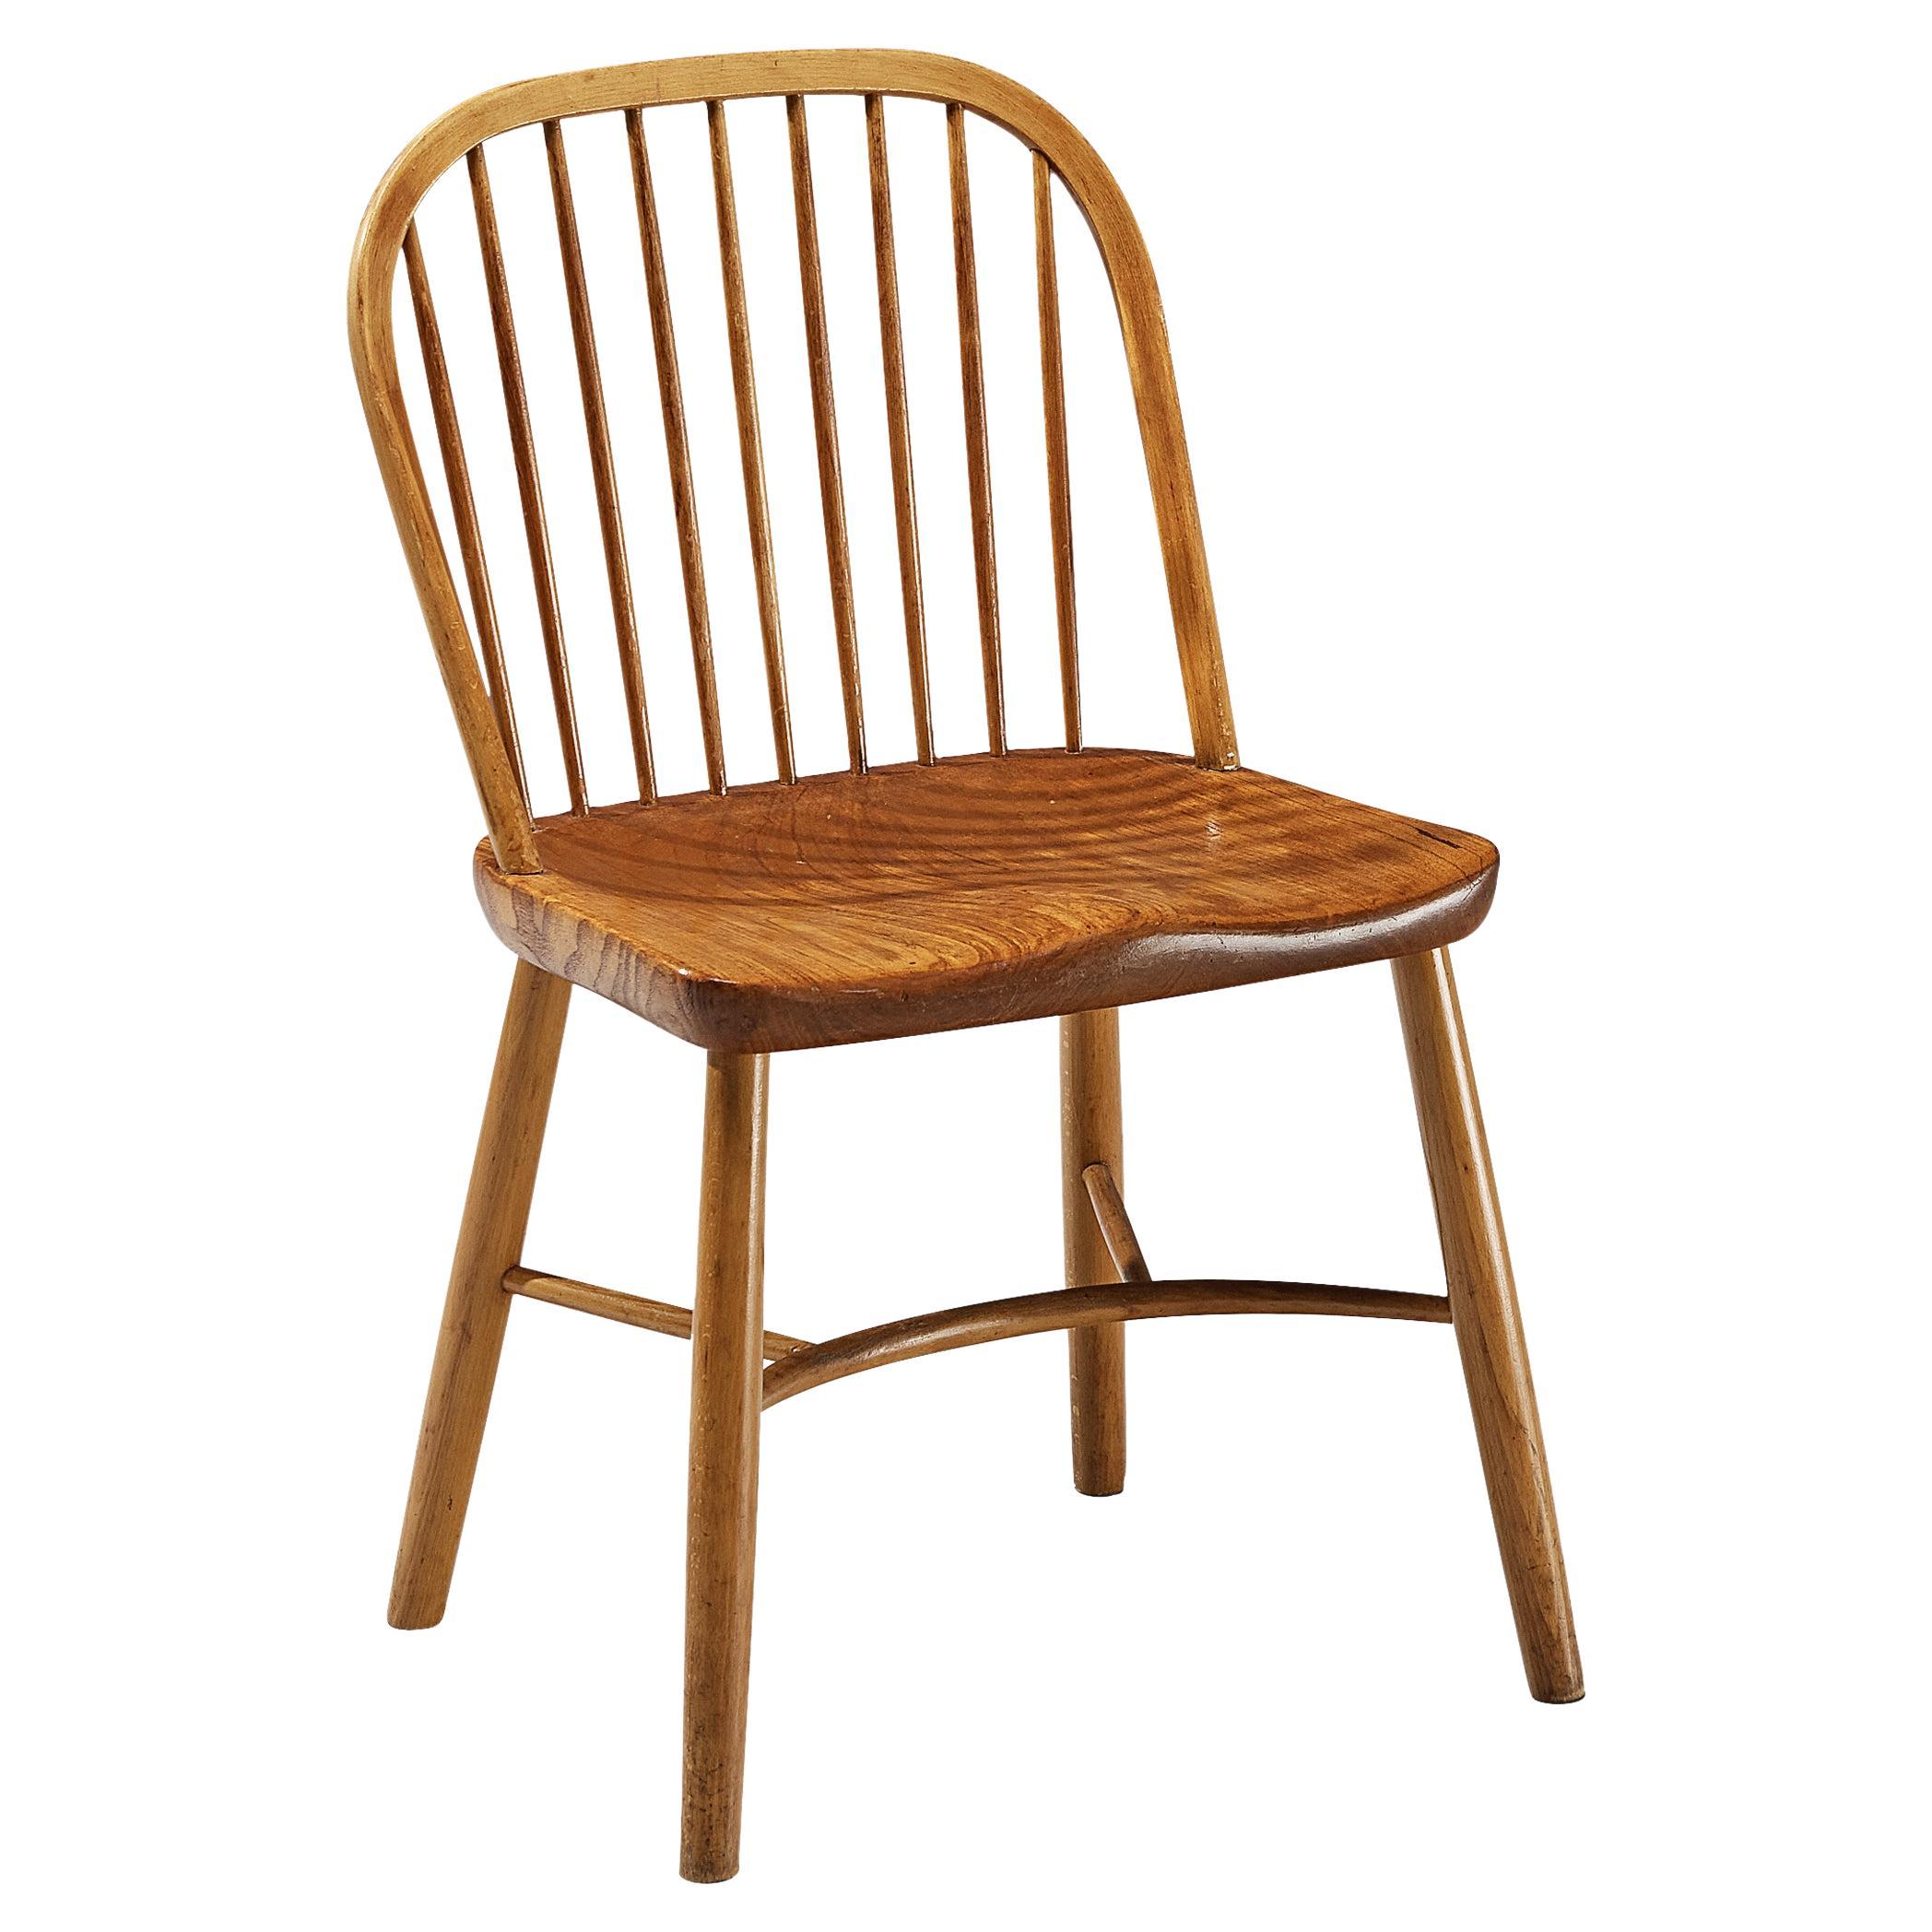 Palle Suenson Dining Chair with Teak Seat  For Sale